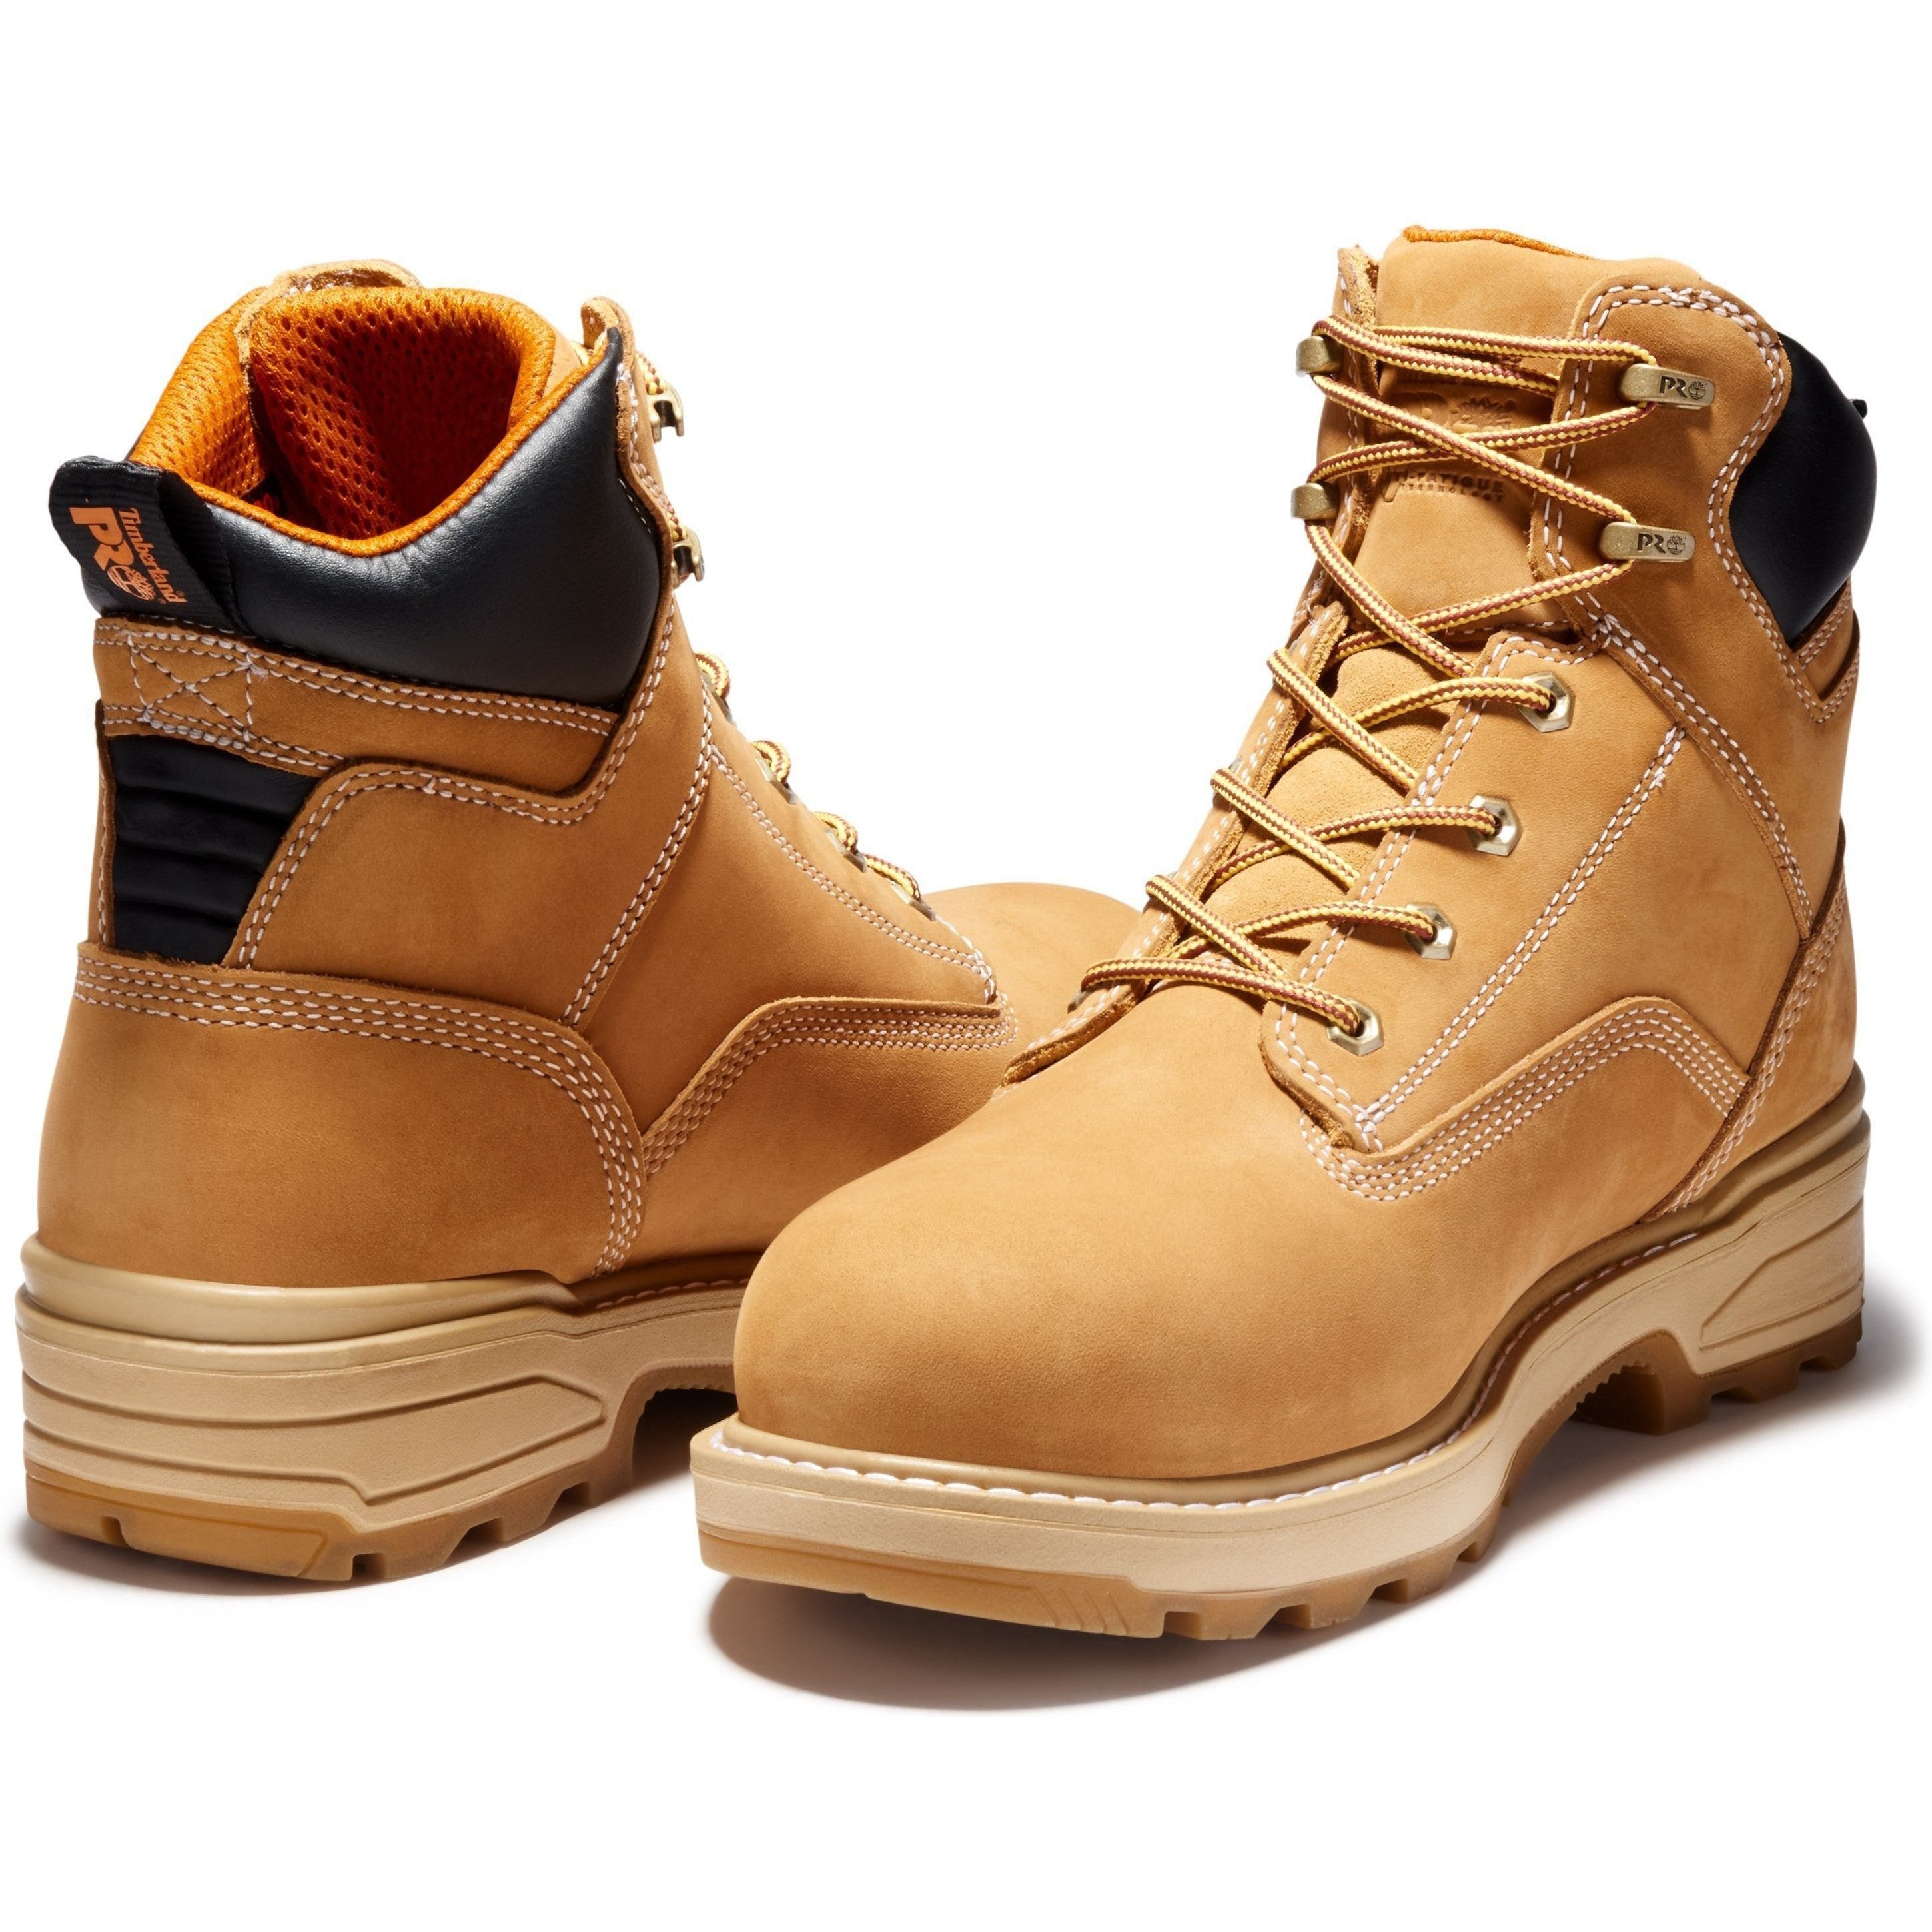 Timberland PRO Men's Resistor 6" Comp Toe WP Ins Work Boot TB0A121H231  - Overlook Boots